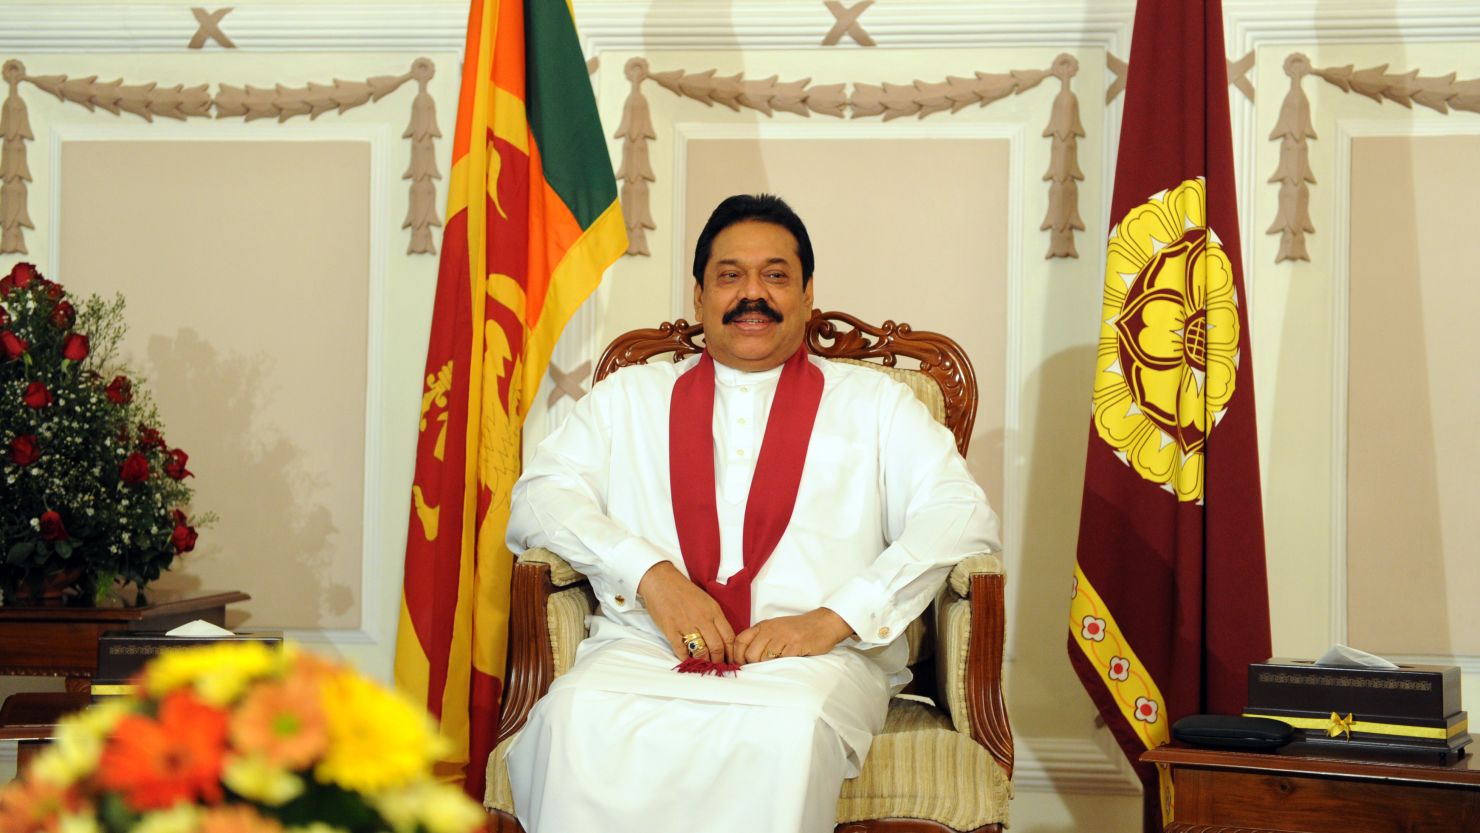 Sir Lankian President Mahinda Rajapaksa has received a 400-page response to U.N. allegations that the country committed war crimes.